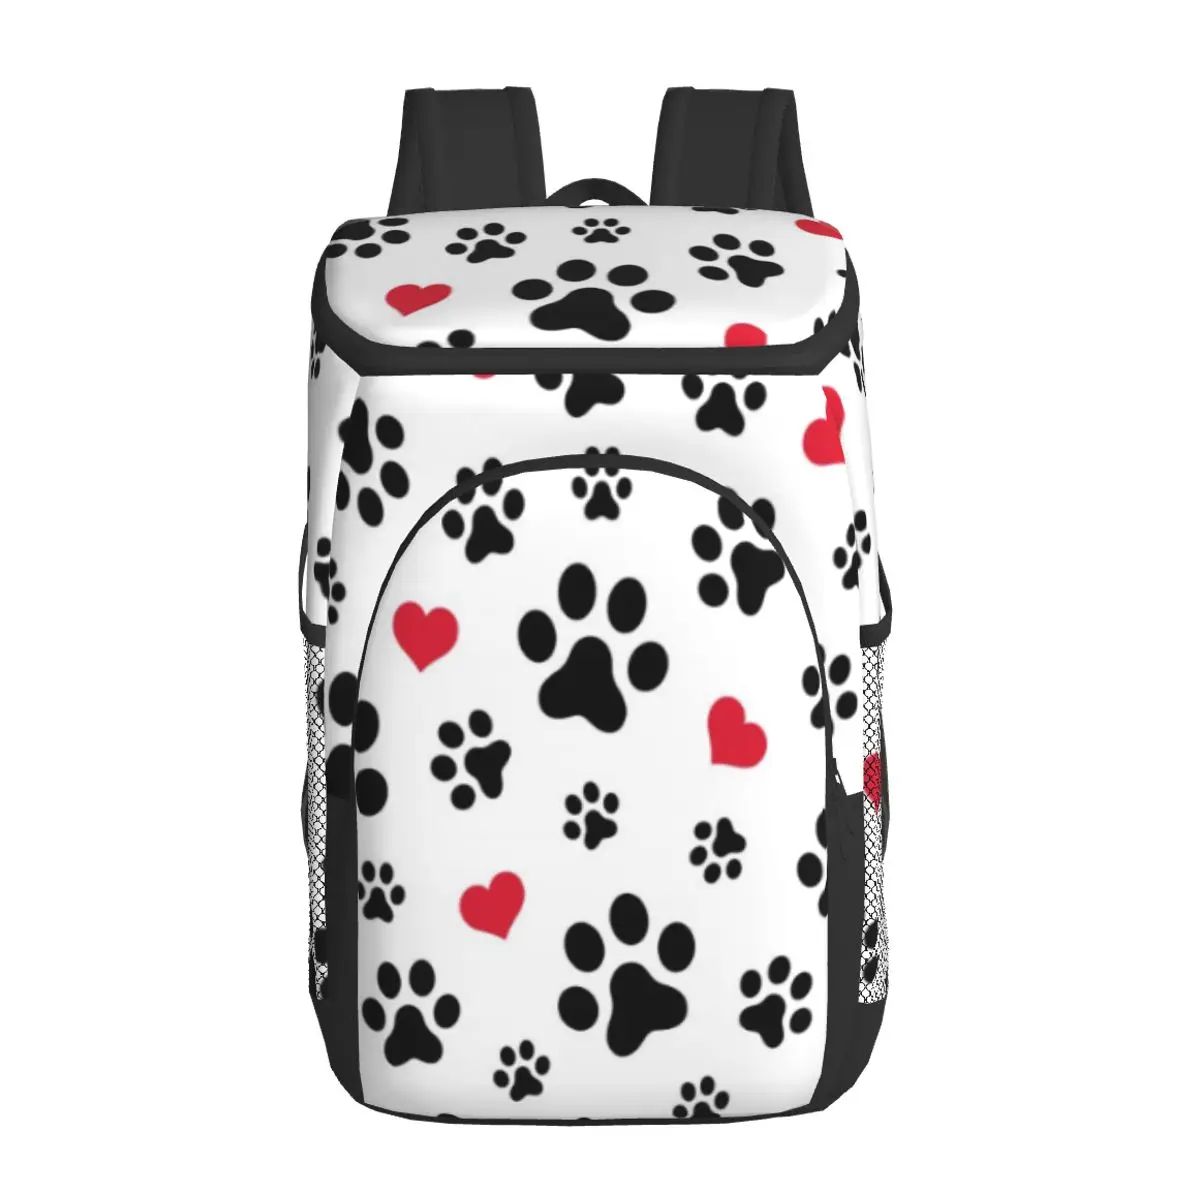 thermal backpack dogs cats paws heart love waterproof cooler bag large insulated bag picnic cooler backpack refrigerator bag free global shipping